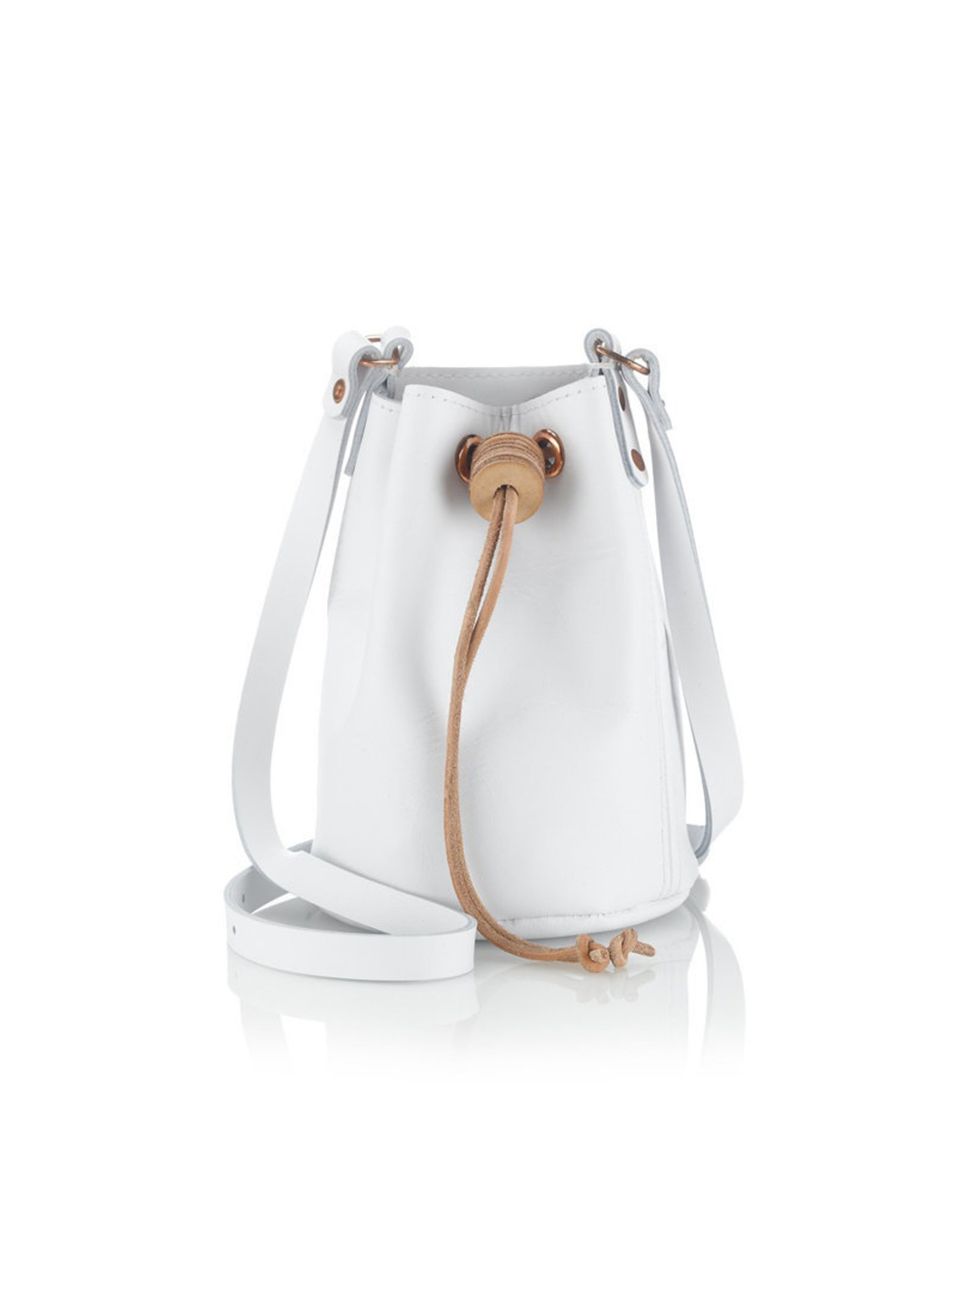 <p>Think of this as a grown-up beach bucket. Just don't fill it with sand.</p><p>Alfie Douglas bucket bag, £140, from <a href="http://www.avenue32.com/whats-new/white-alfie-eight-mini-duffle-bag-19501.html">Avenue32.com</a></p>